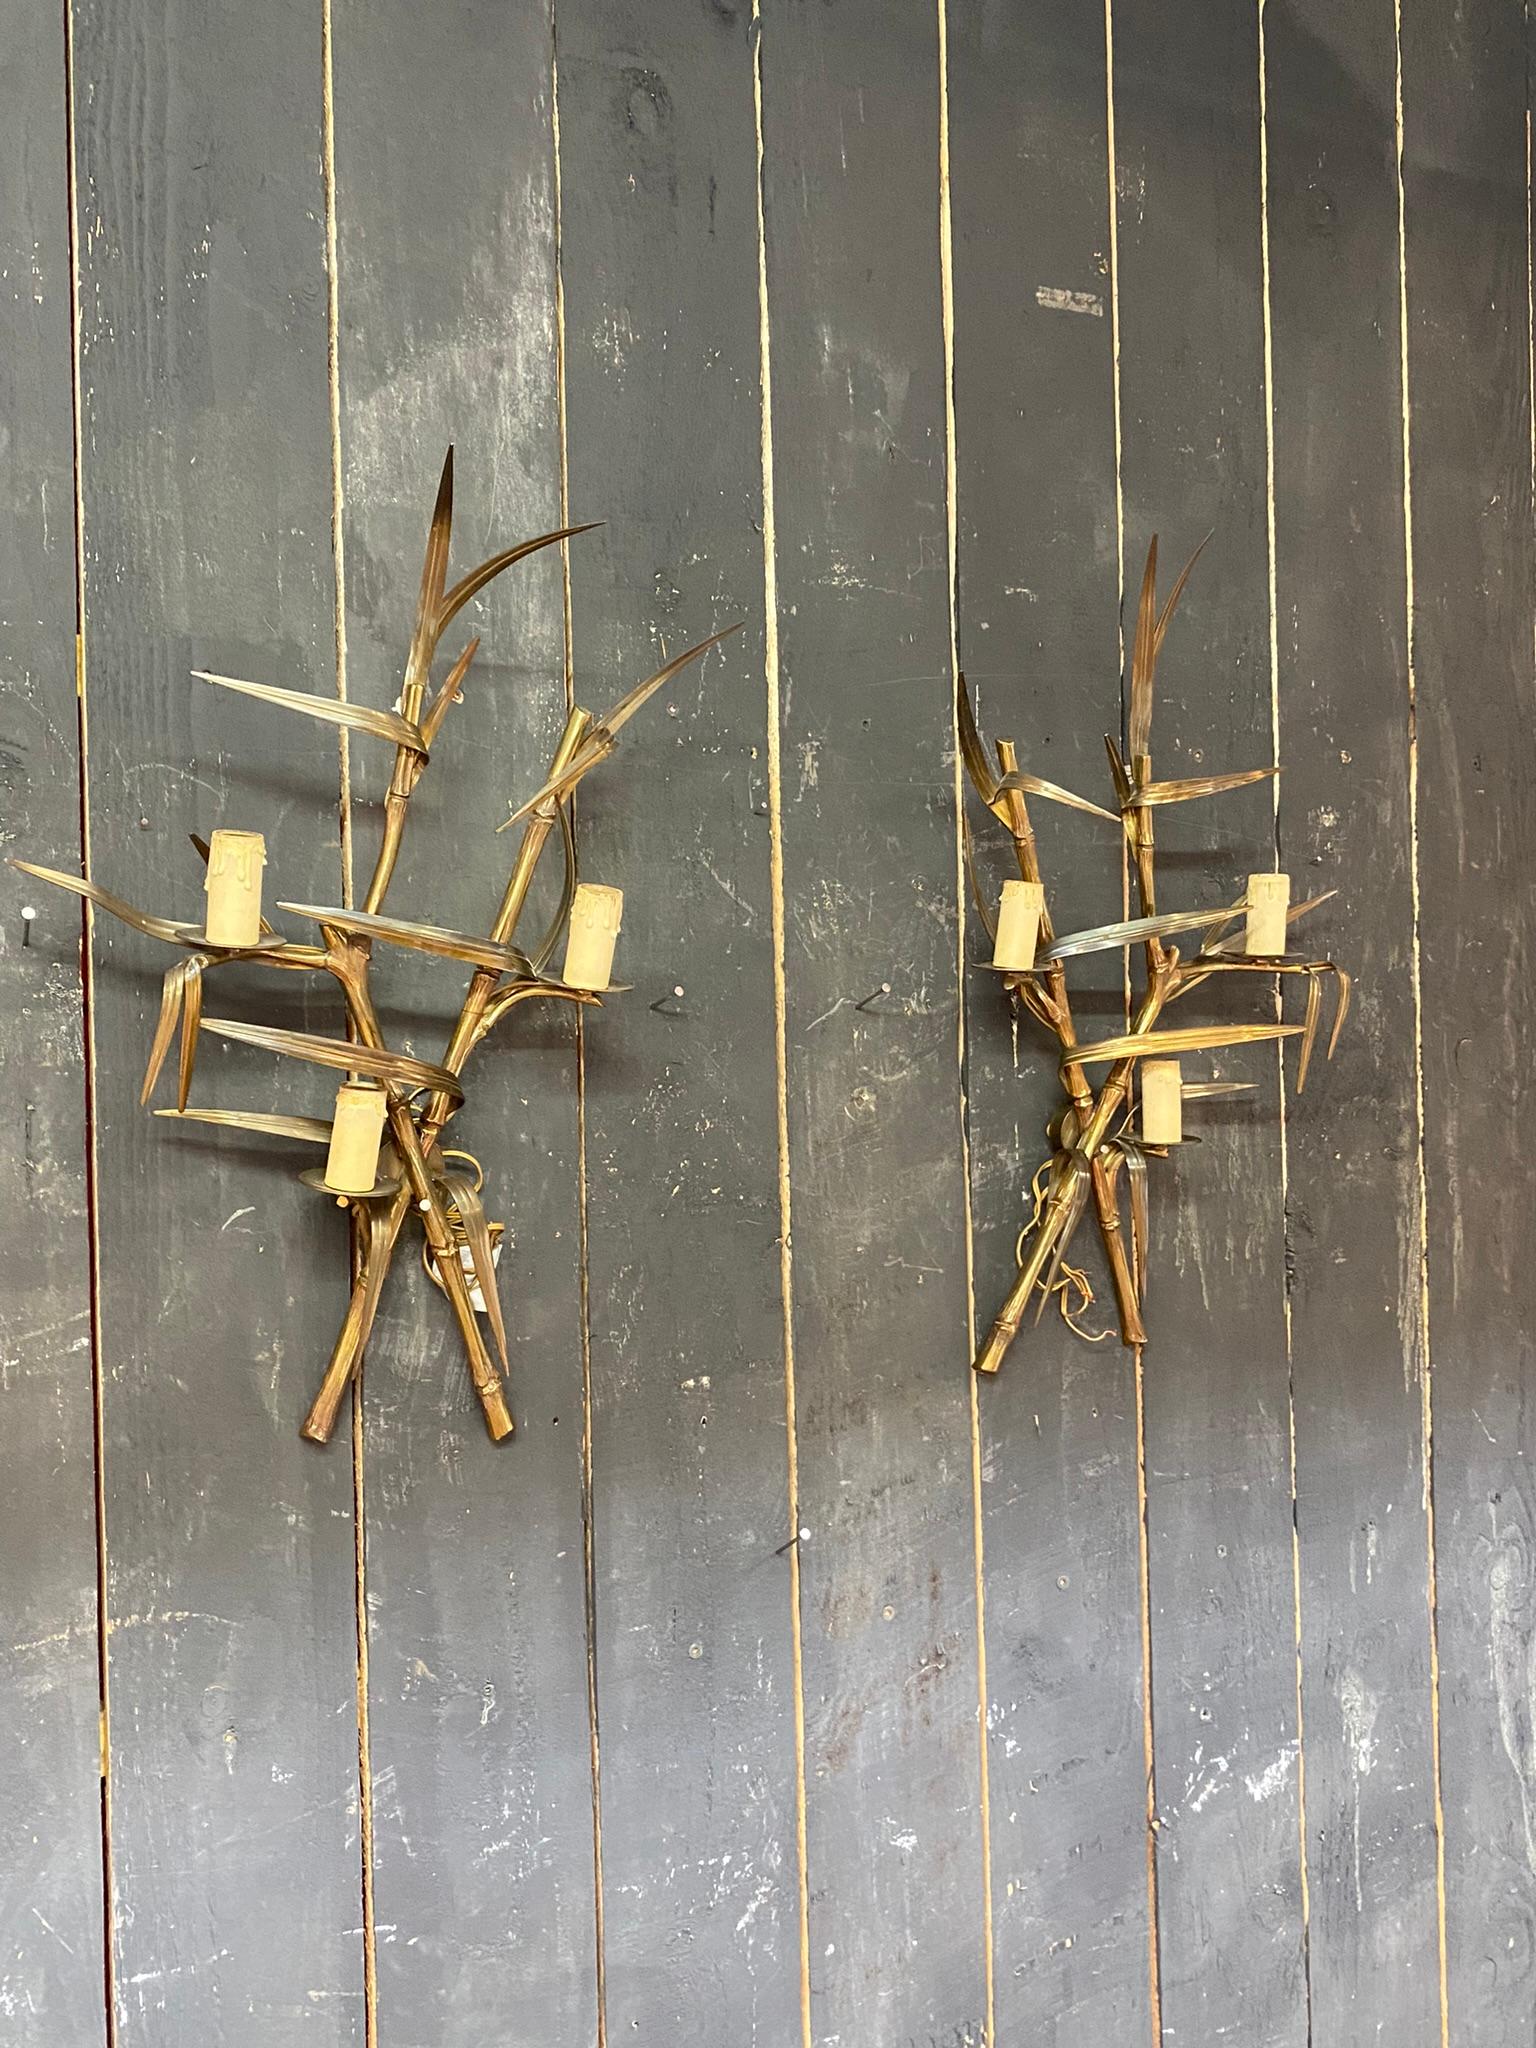 Maison Charles pair of bronze sconces in imitation of bamboo circa 1960/1970 
modele 204
signed.